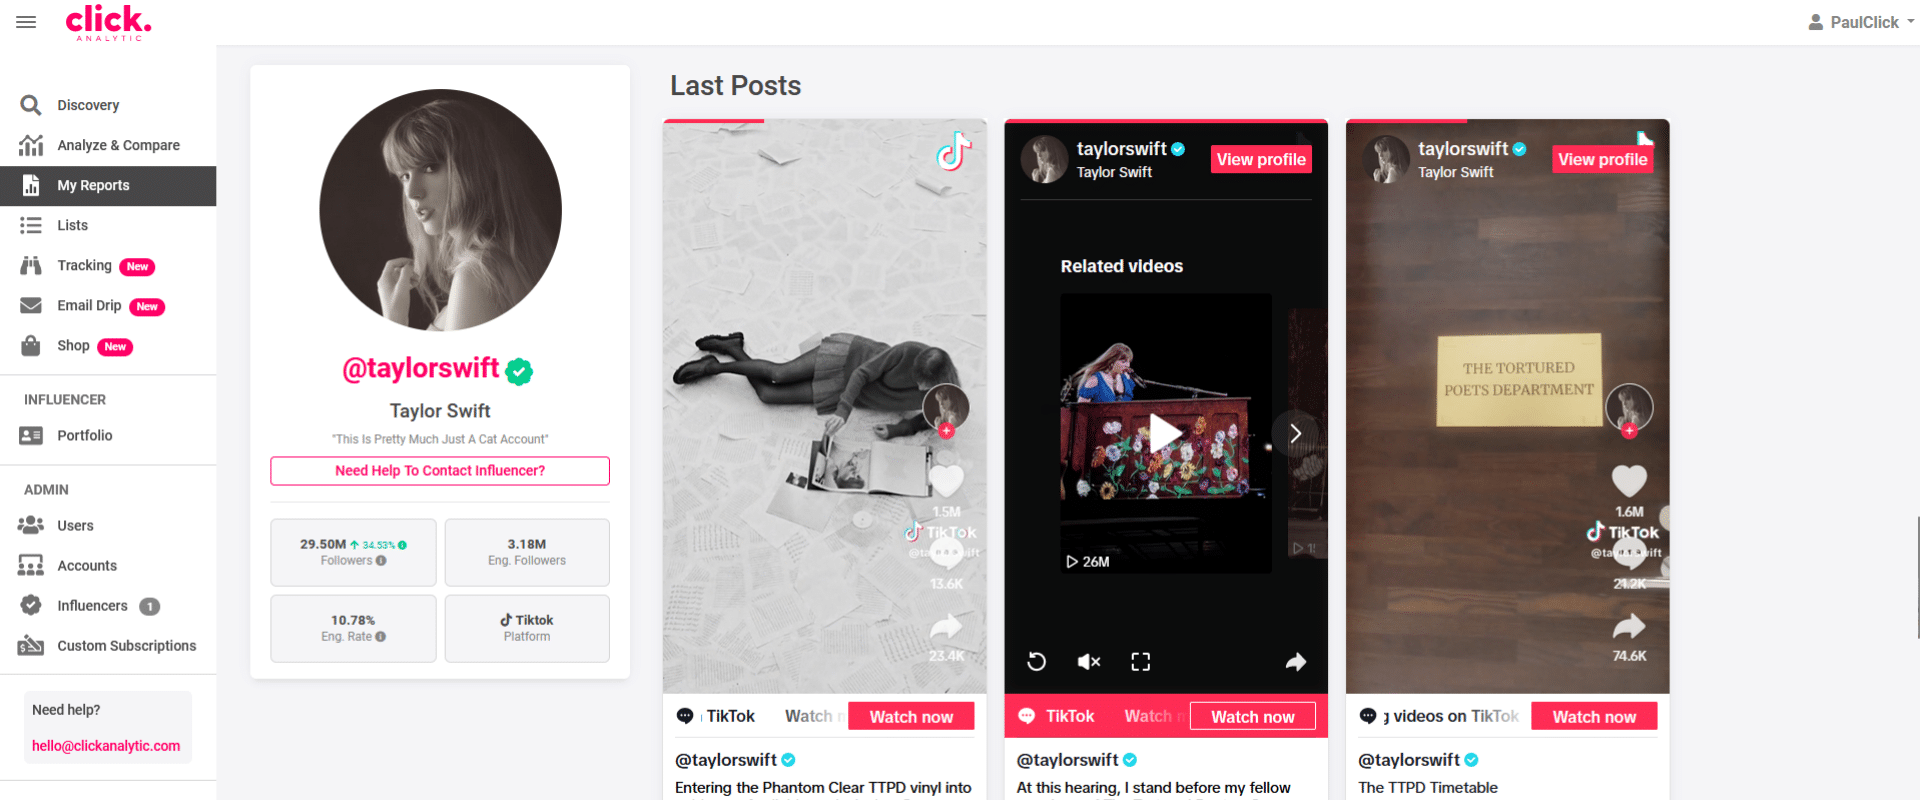 Screenshot of a social media profile page for "taylor swift" with various posts and video thumbnails displayed.